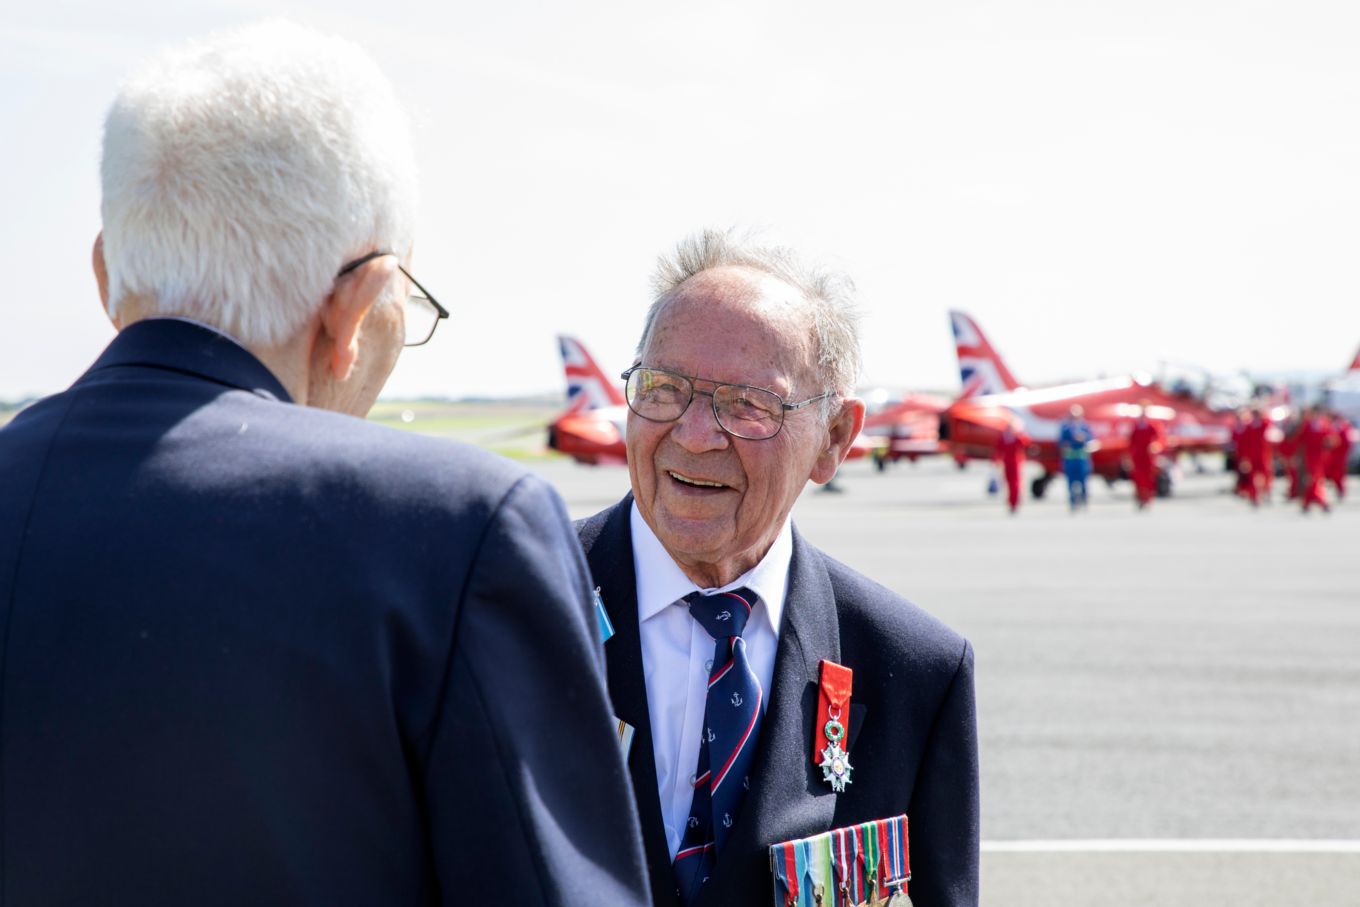 Image shows veterans next to Red Arrows aircraft.